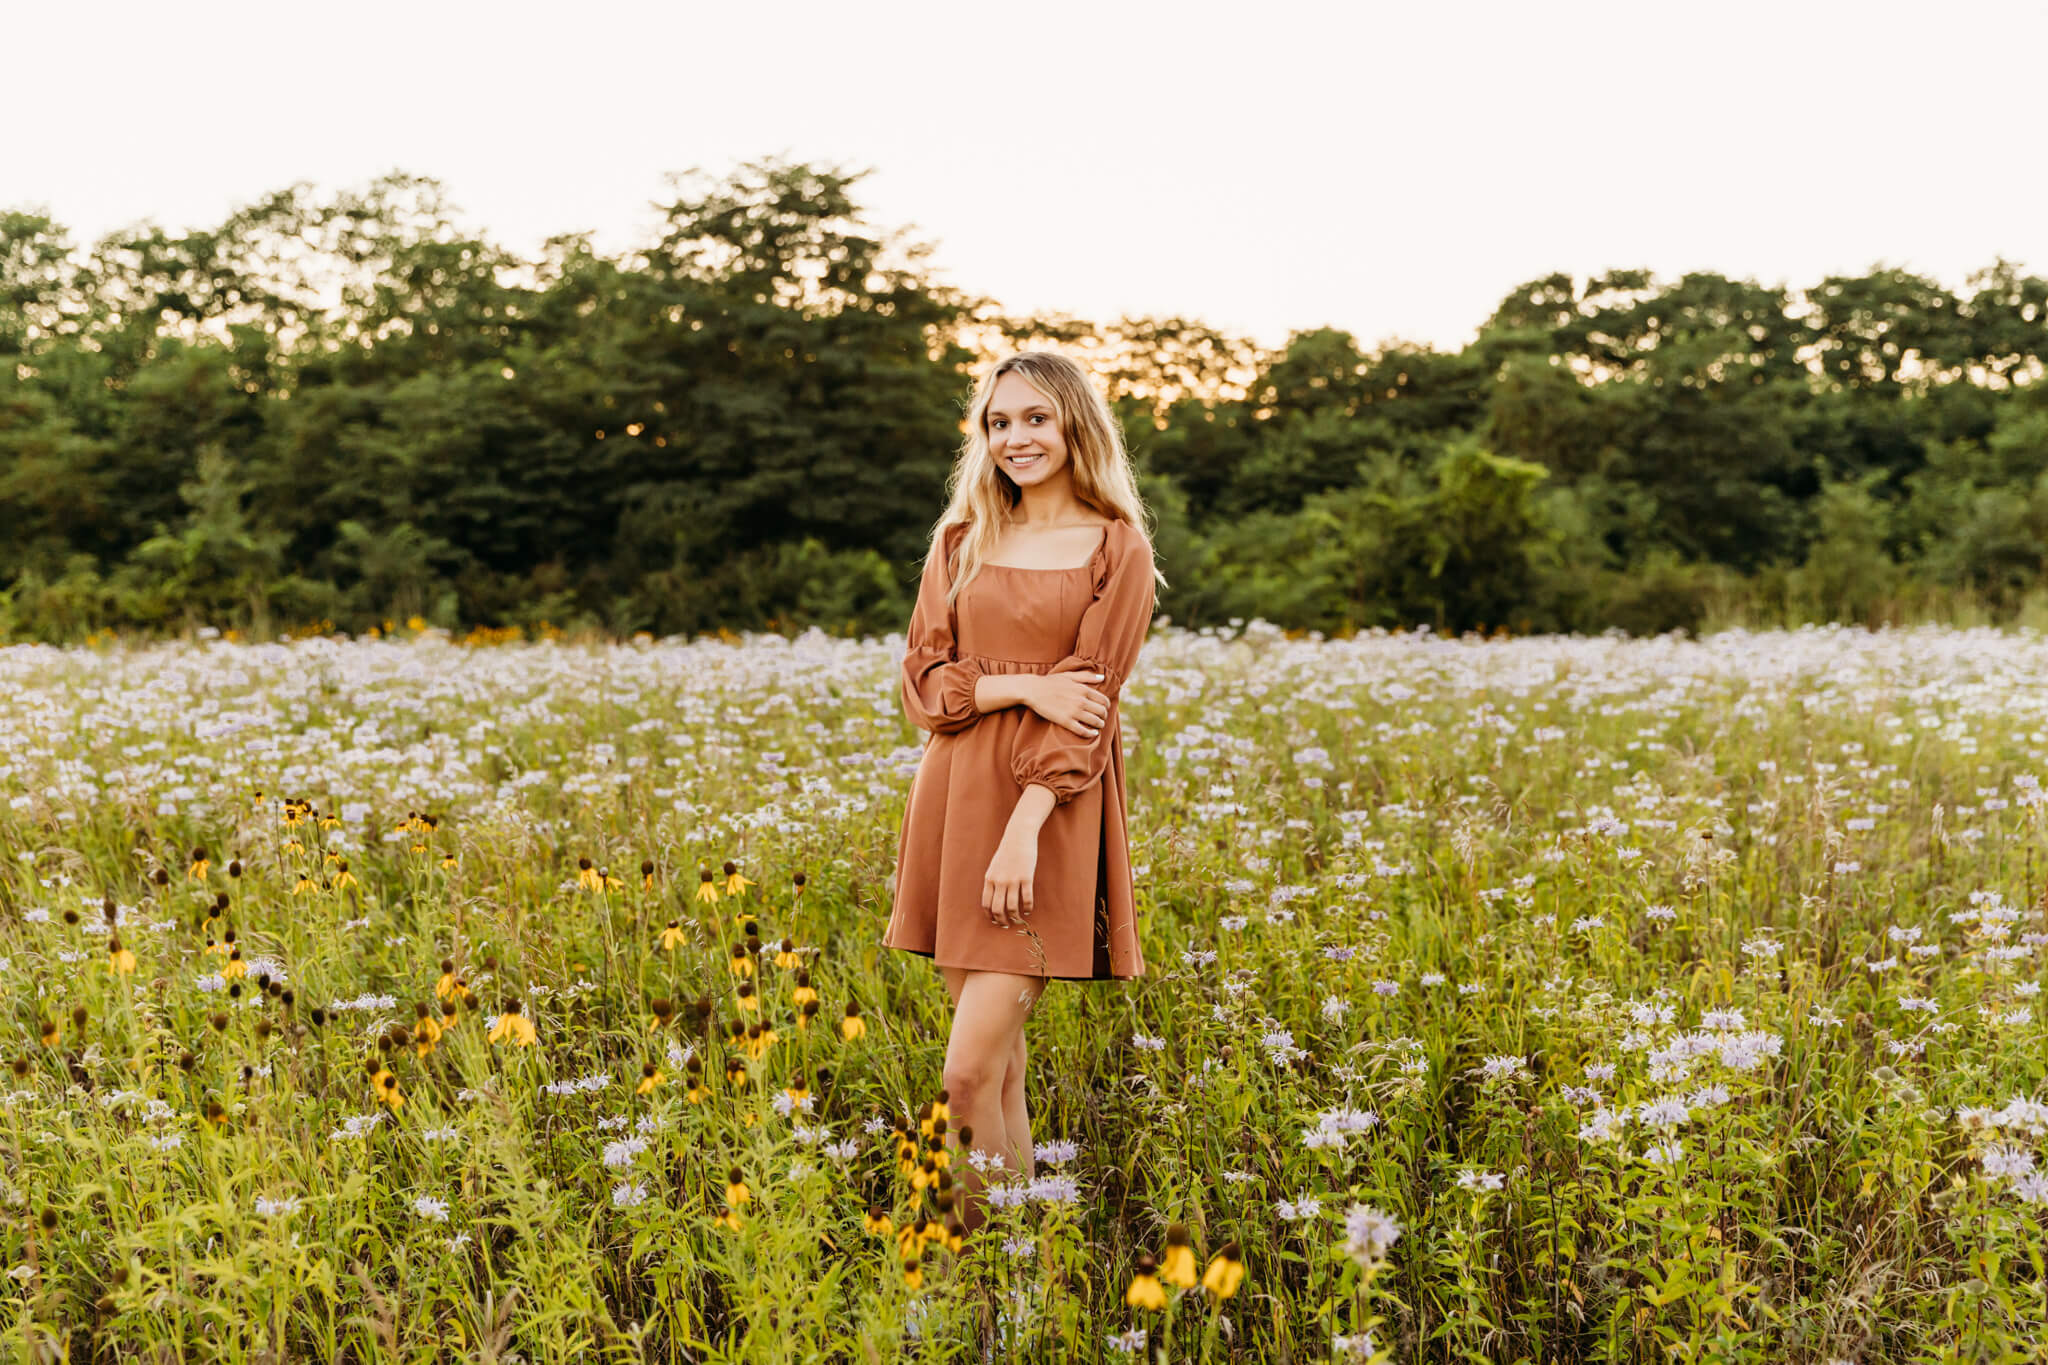 gorgeous teen in an orange dress standing in a field of wildlfowers at sunset near Oshkosh